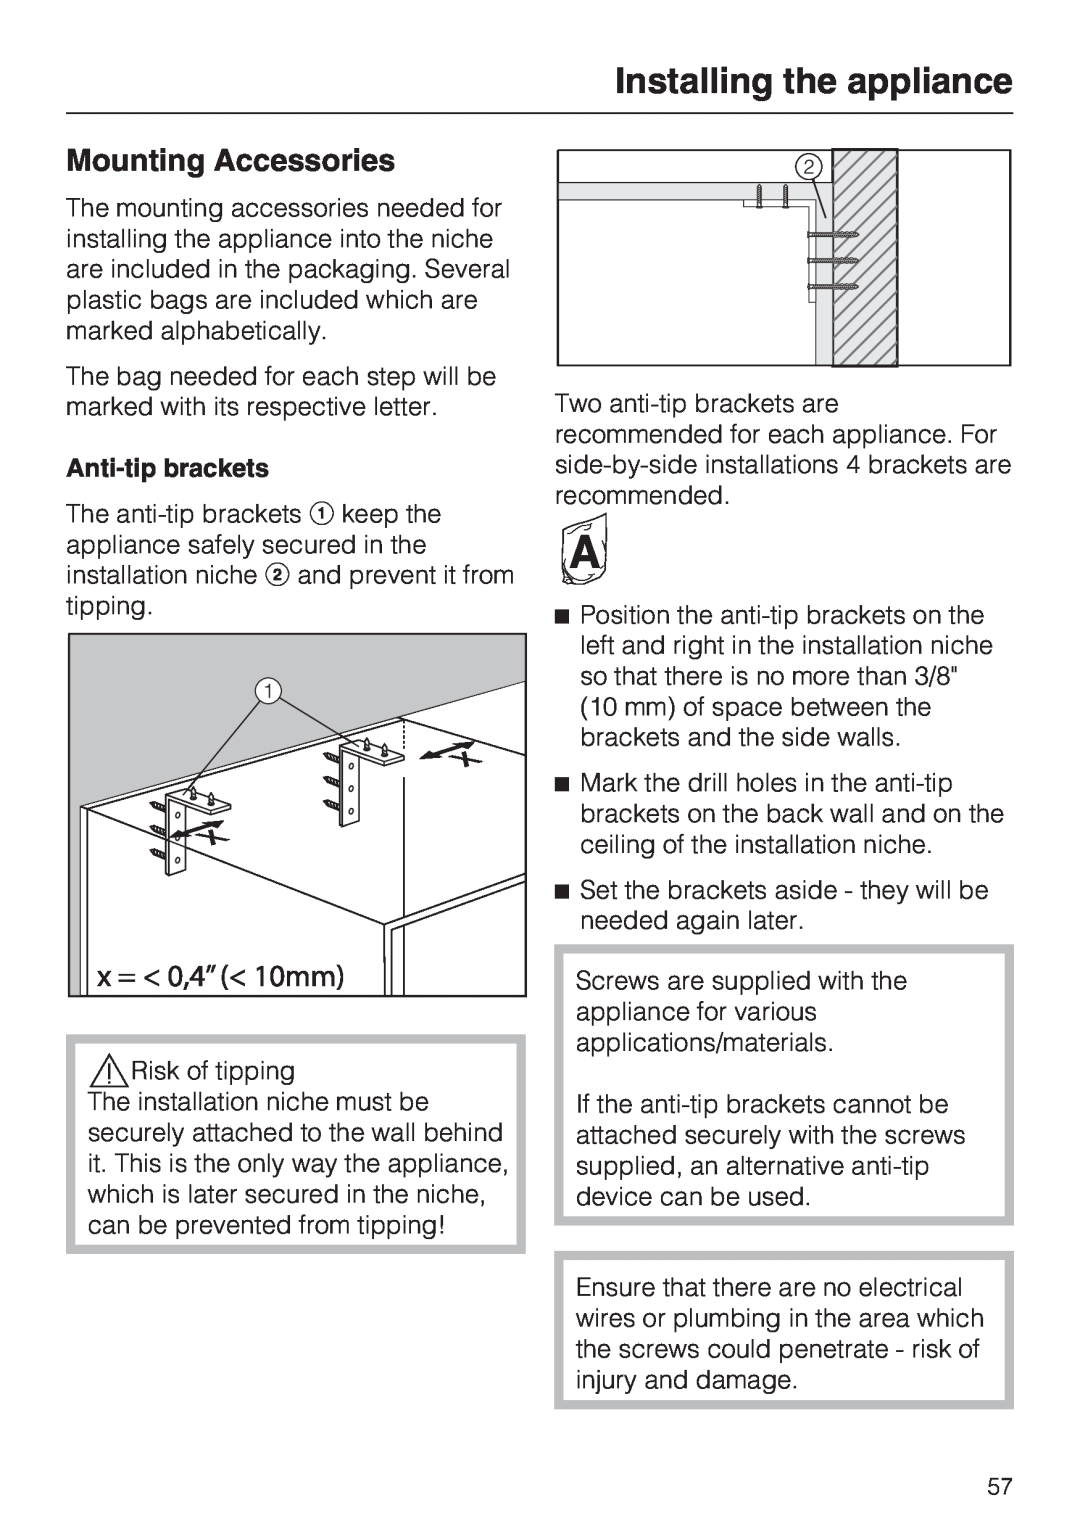 Miele F 1411 Vi installation instructions Mounting Accessories, Installing the appliance, Anti-tipbrackets 